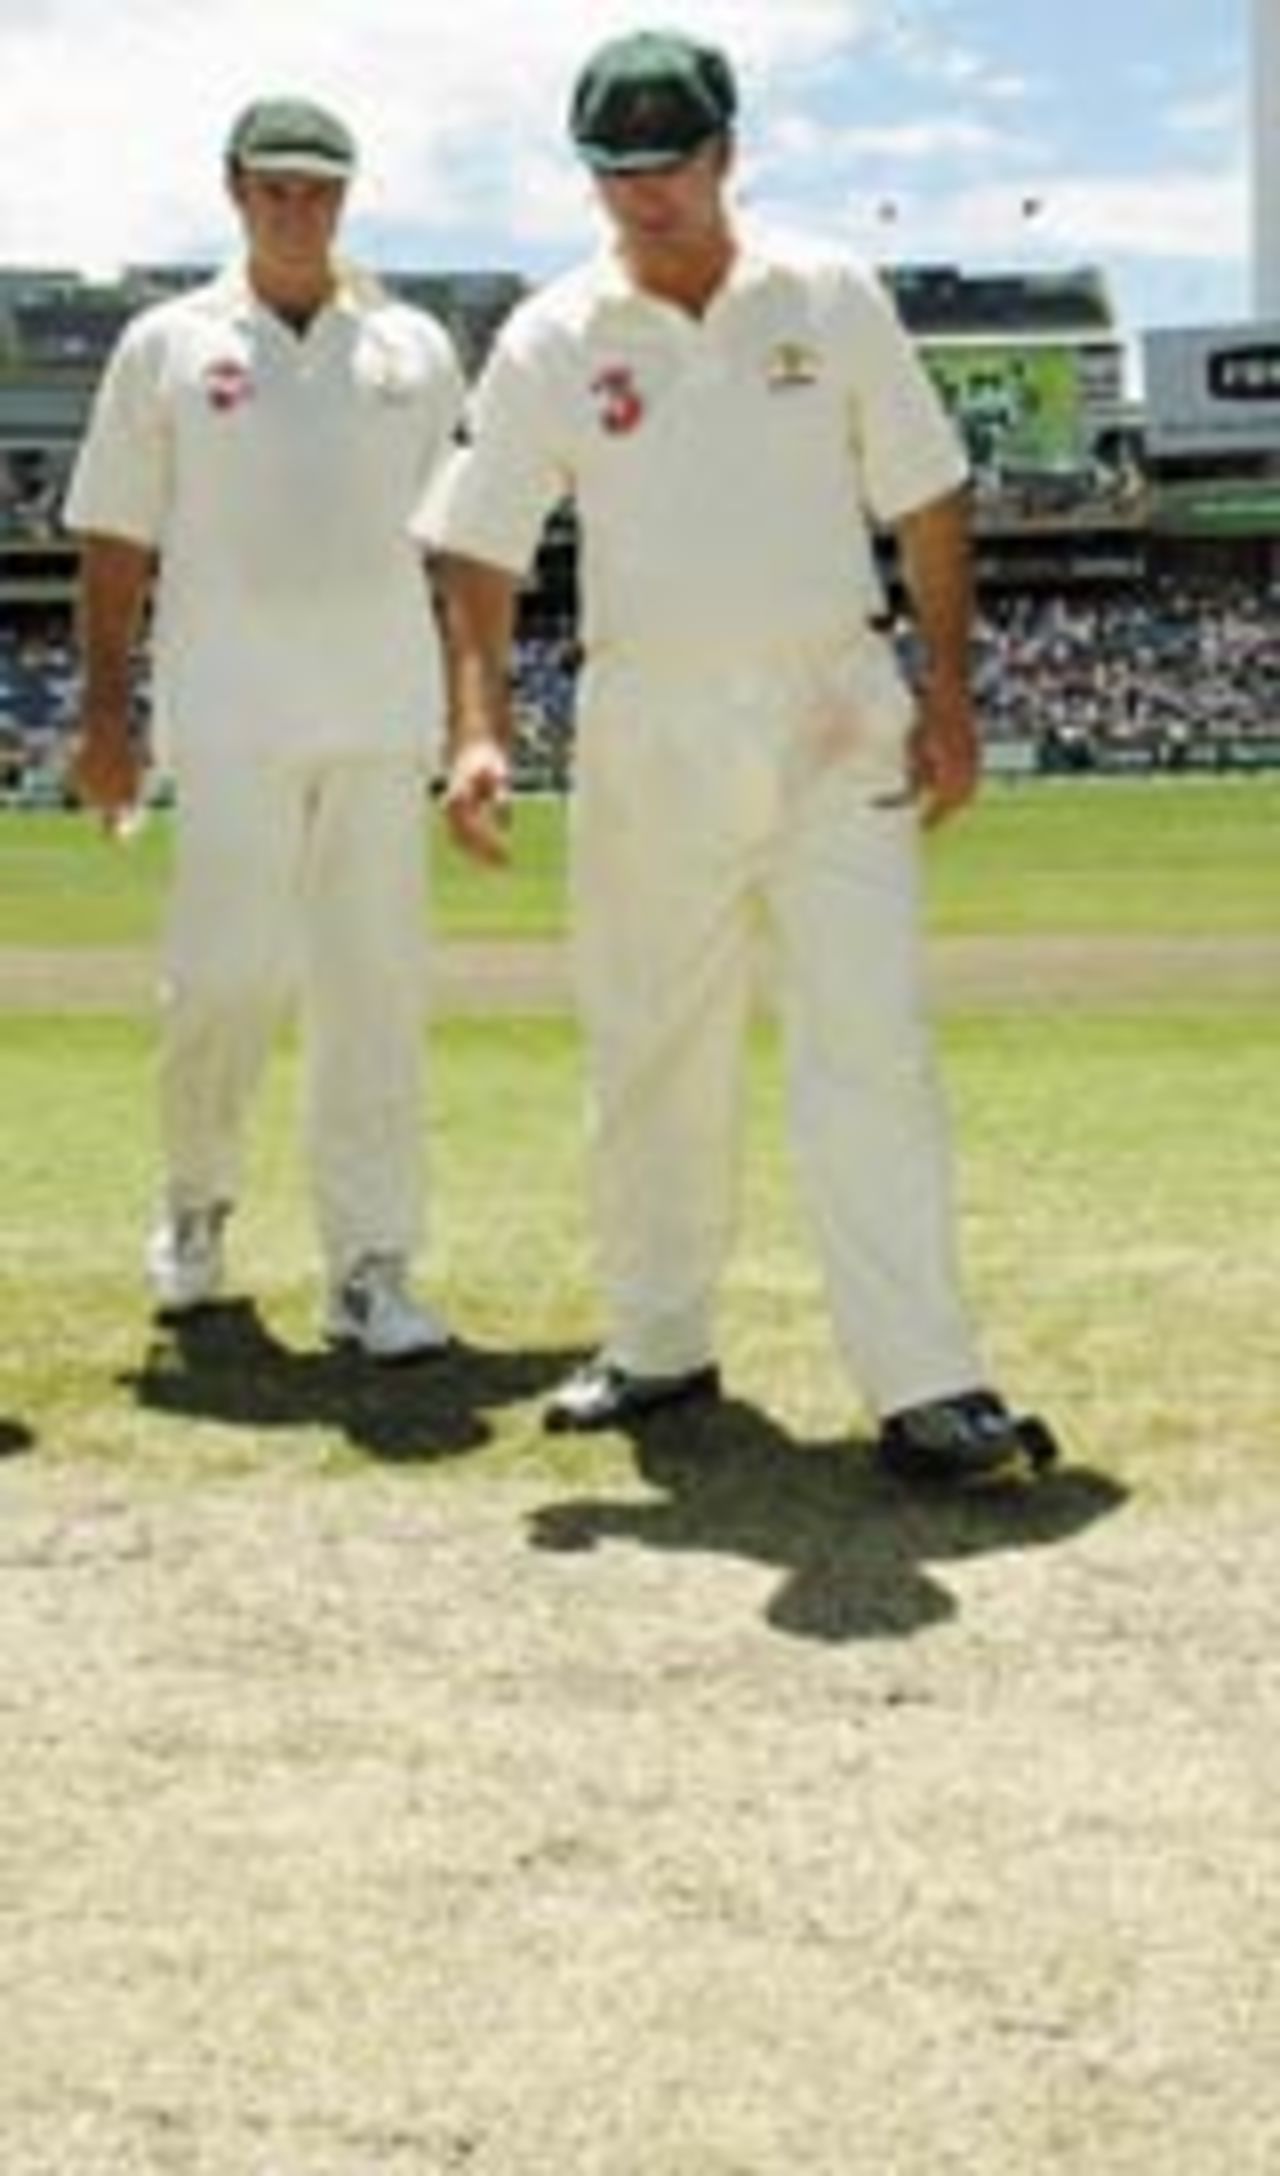 Steve Waugh and Mathew Hayden inspect the pitch at the MCG, Australia v India, 3rd Test, Melbourne, 5th day